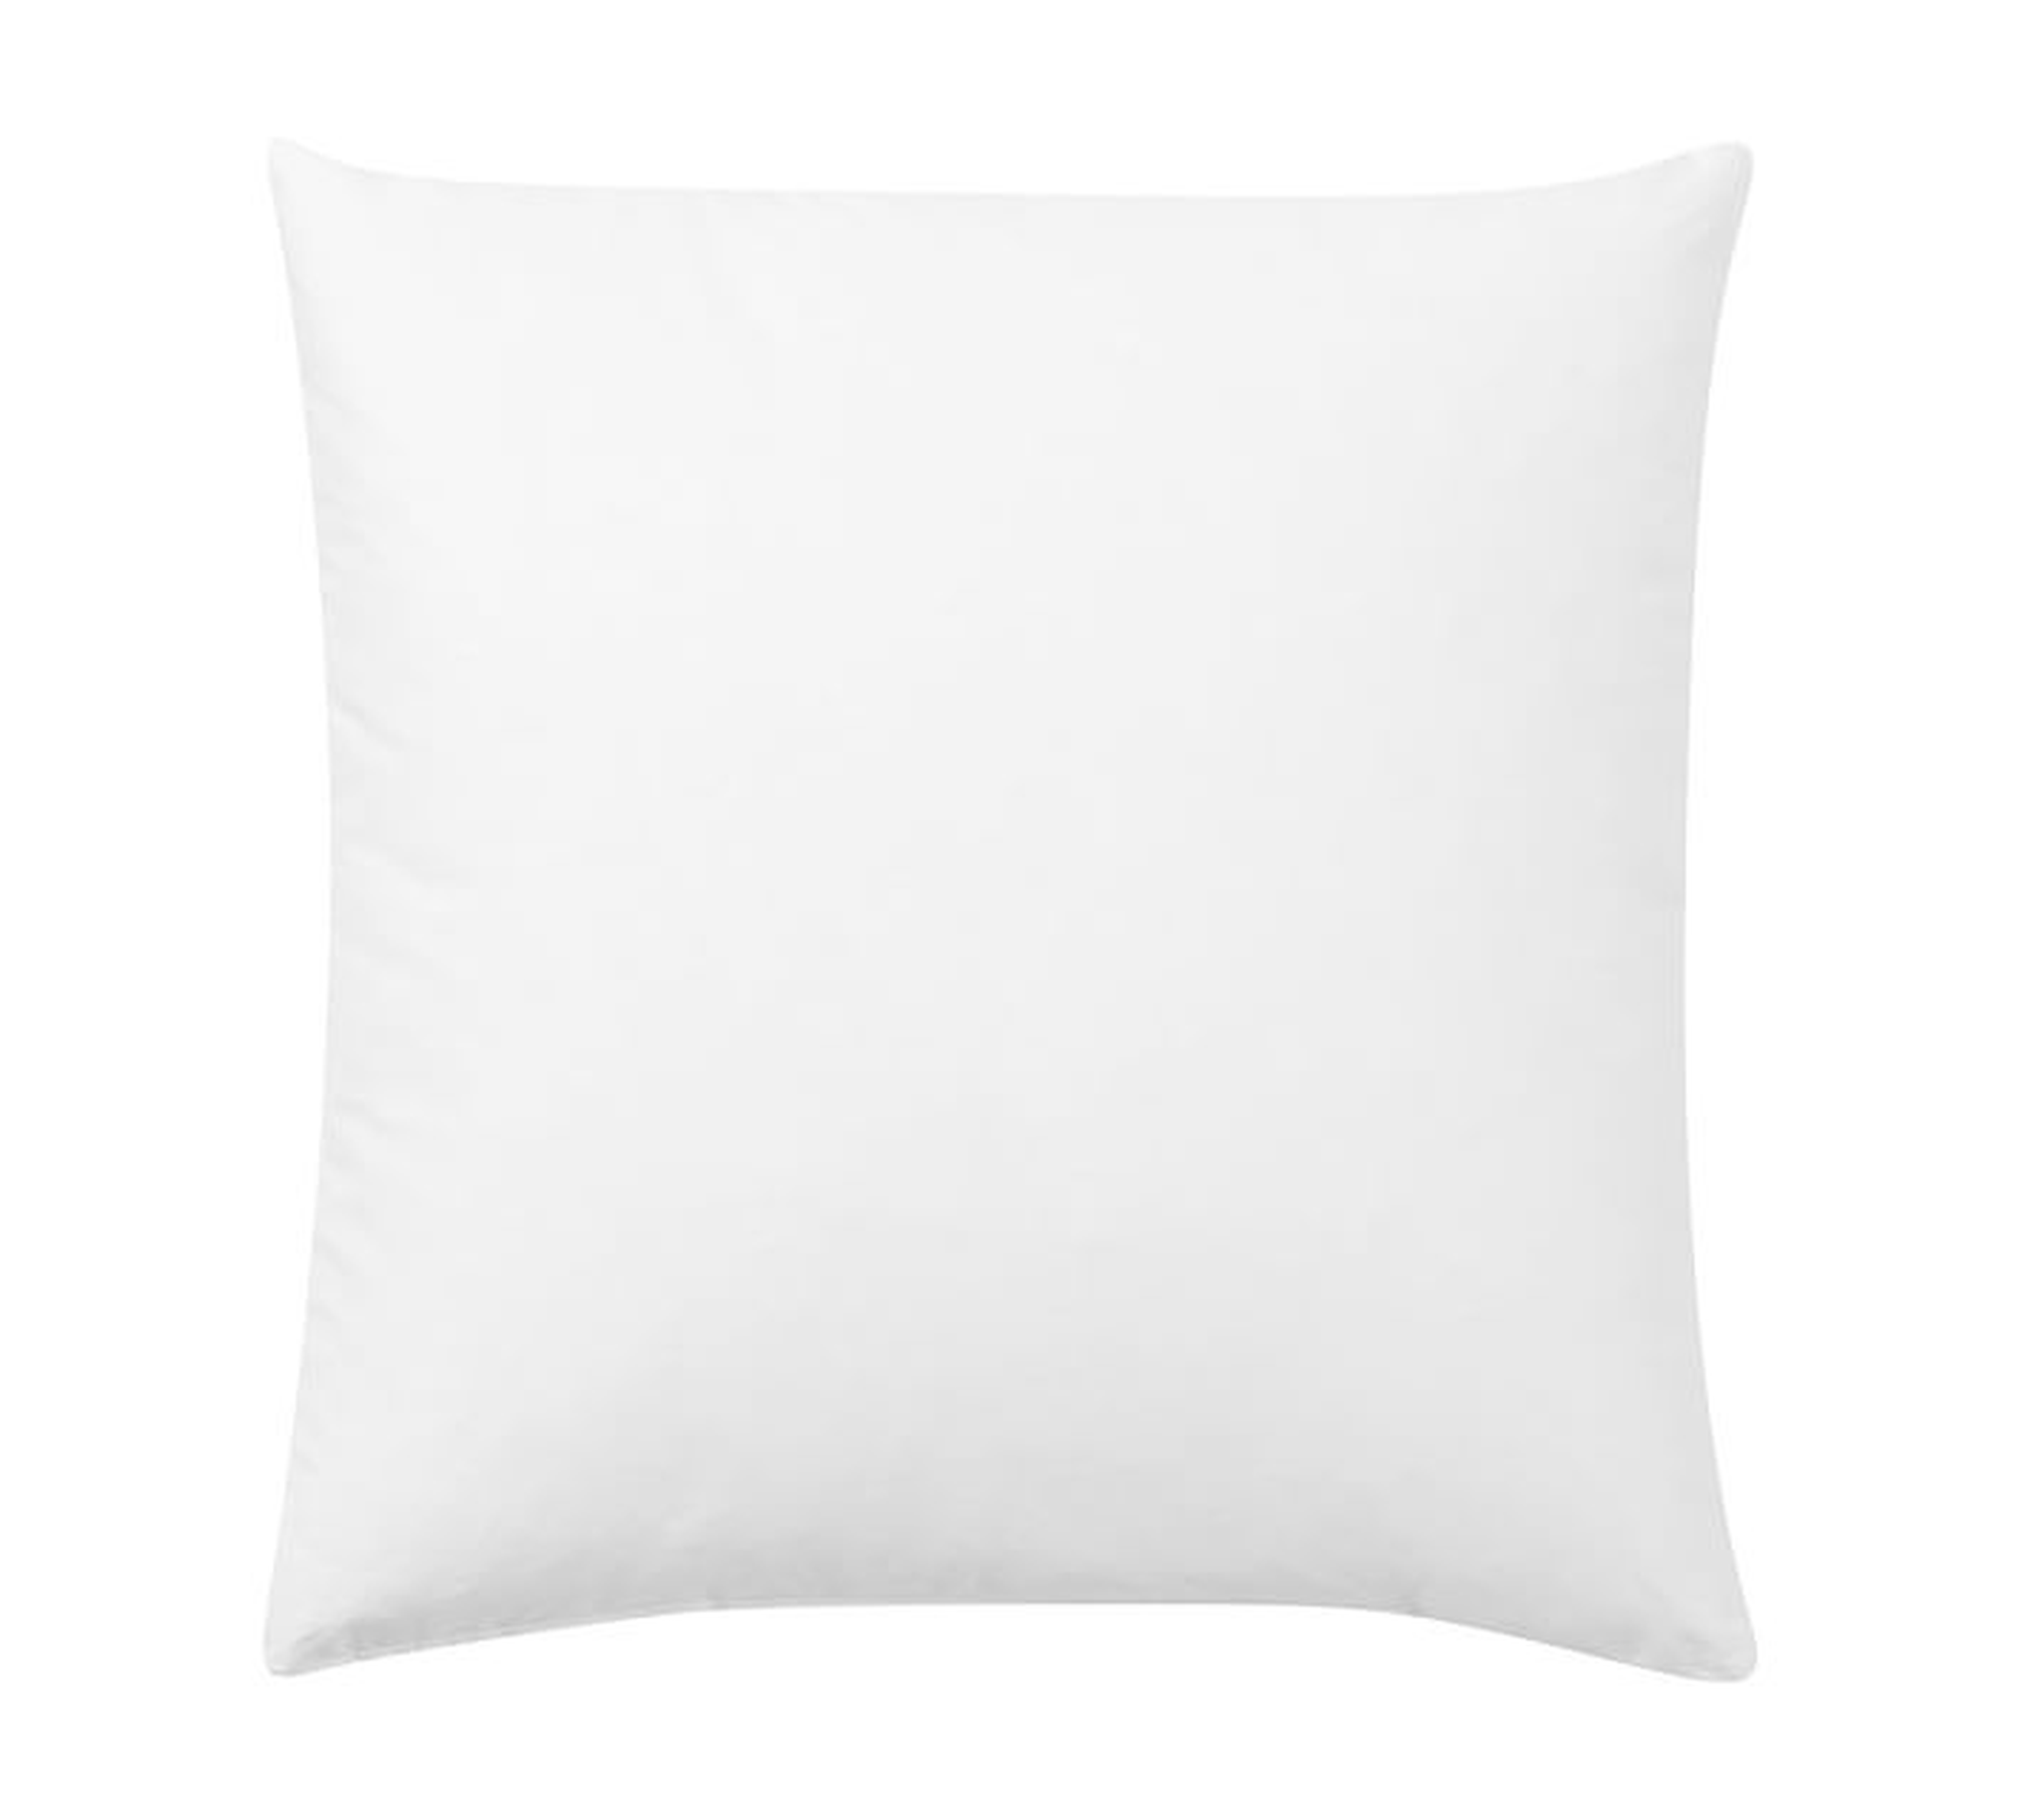 Down Feather Pillow Insert, 22" sq. - Pottery Barn